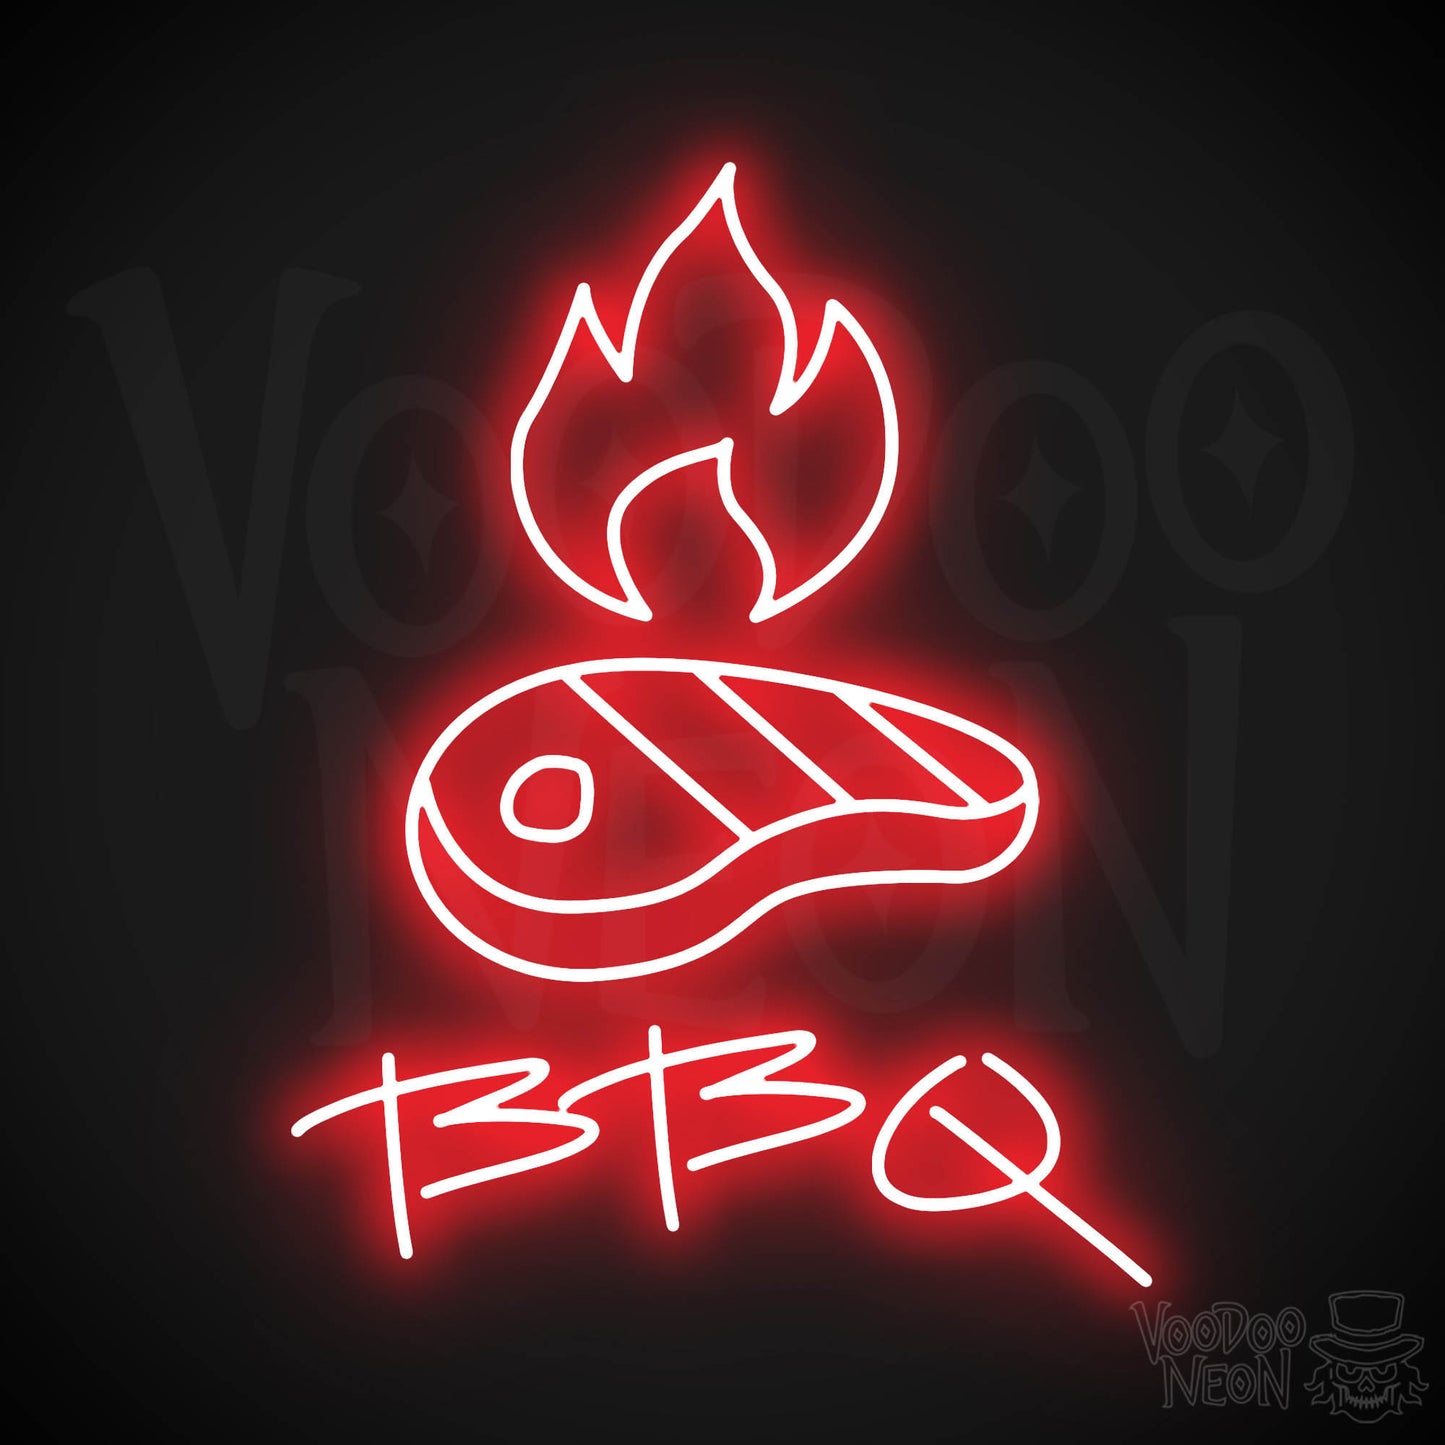 BBQ LED Neon - Red